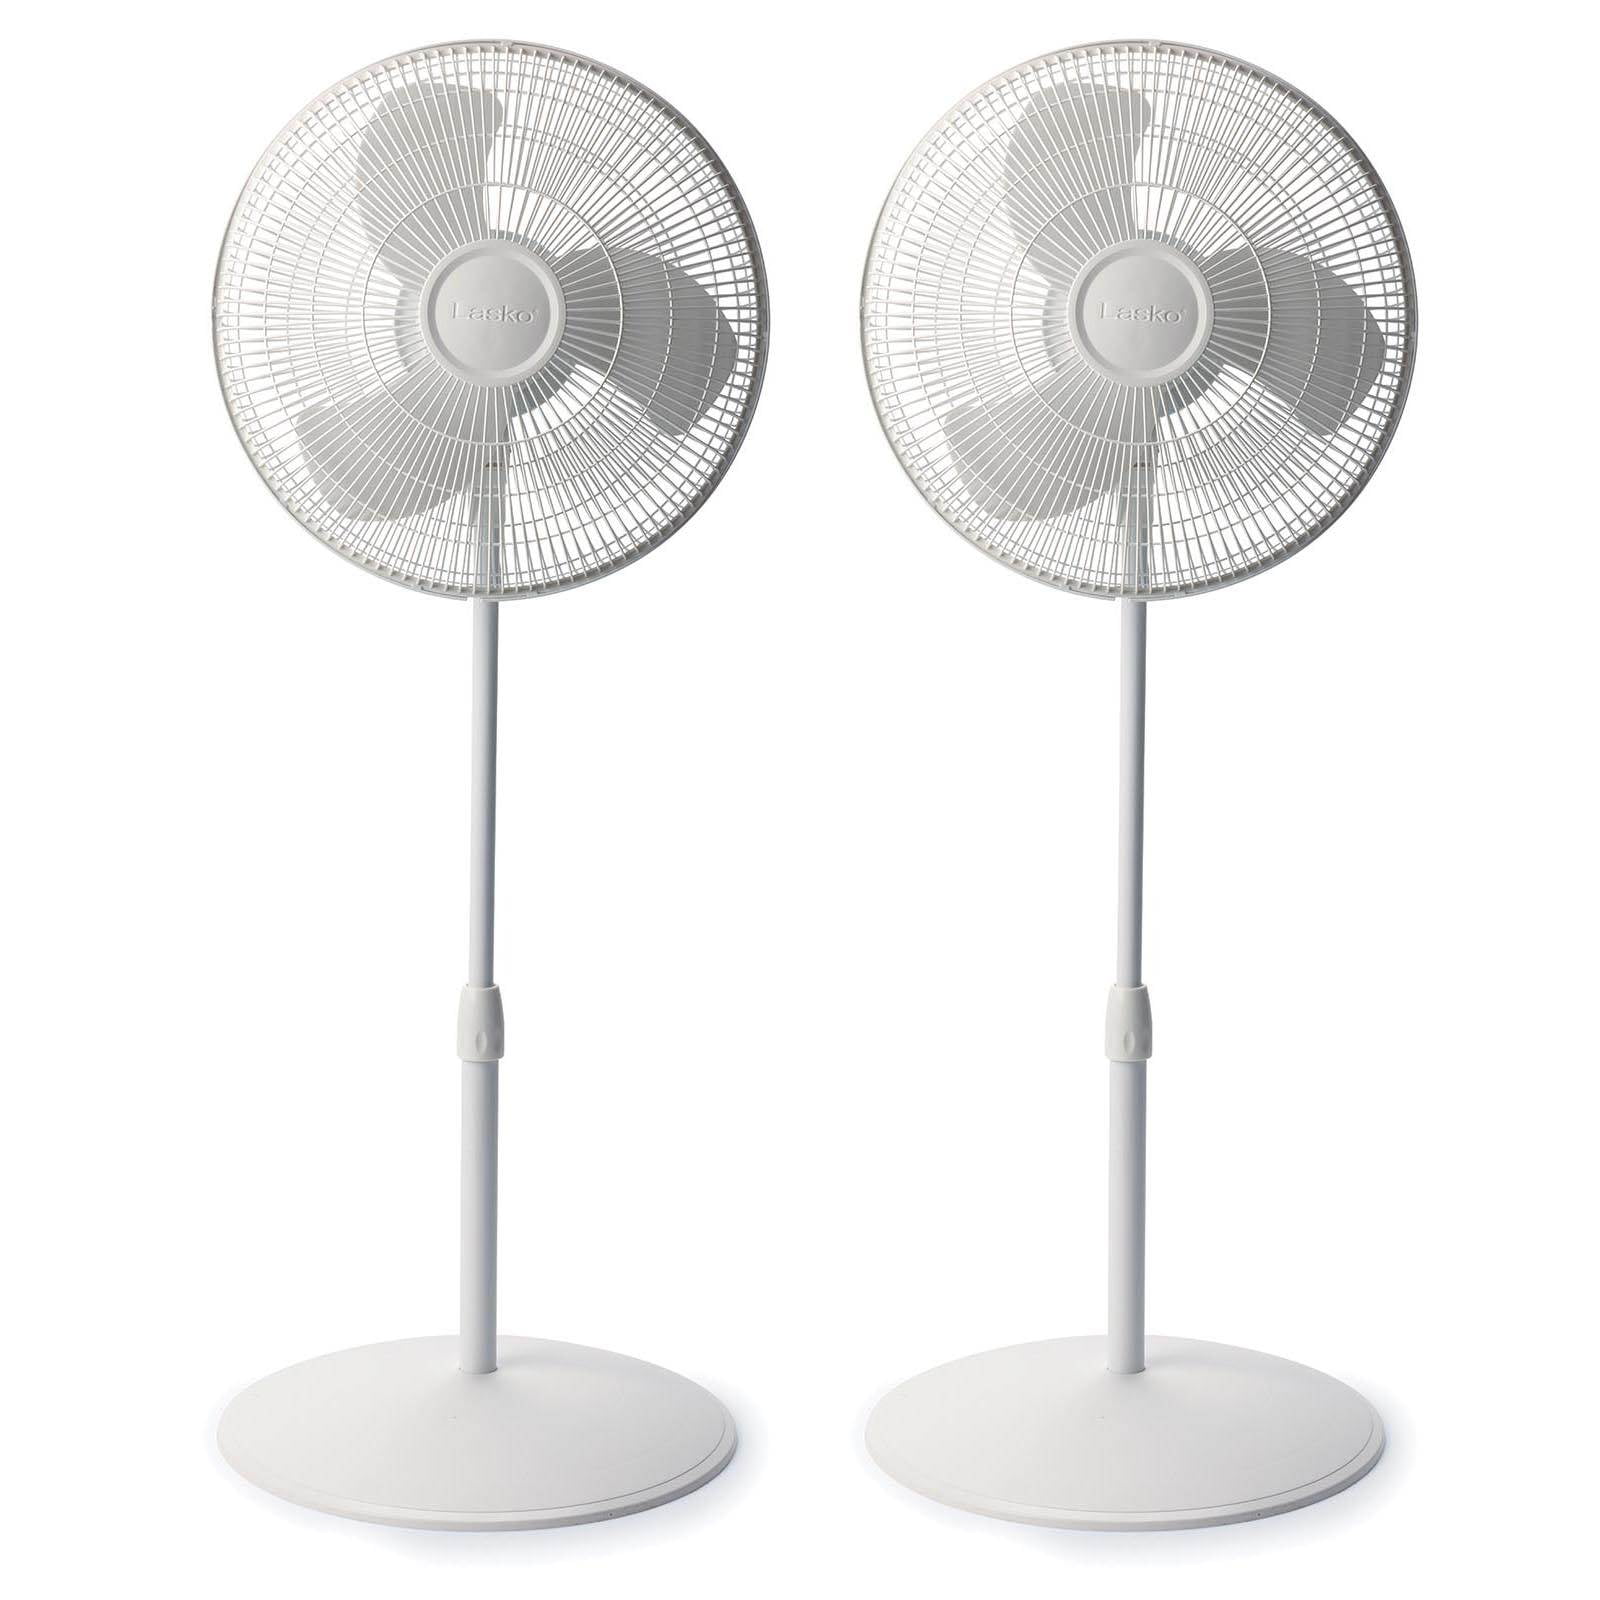 NEW 2x 16" Oscillating Extendable Free Standing Tower Pedestal Cooling Fan